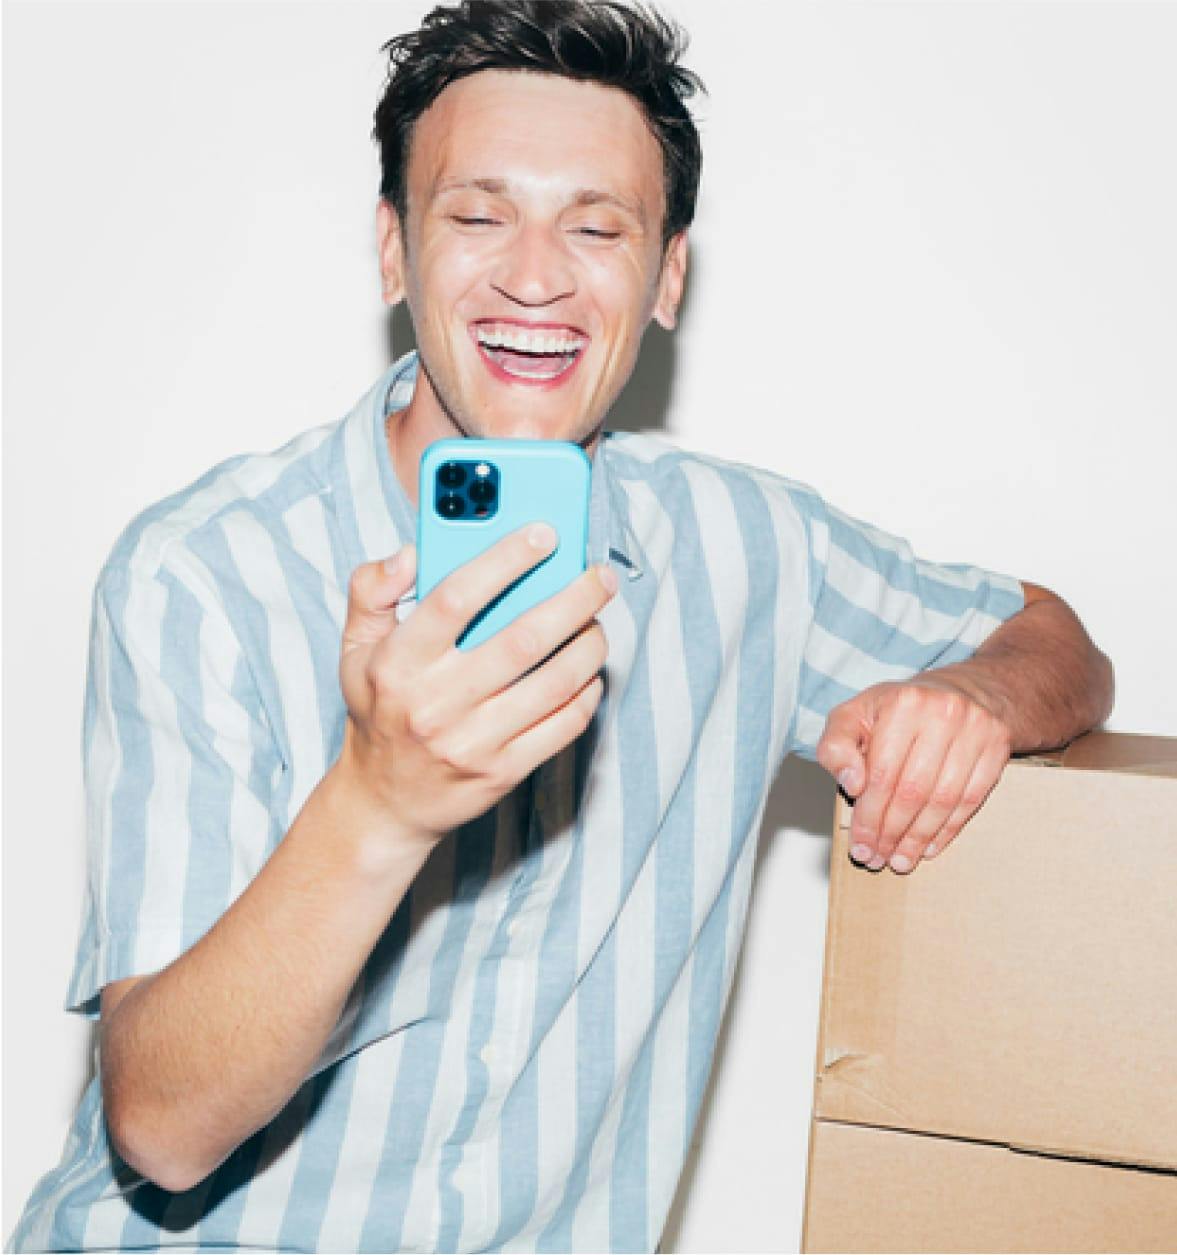 Unibuddy sample student message overlayed on image of laughing man wearing blue striped shirt on blue phone